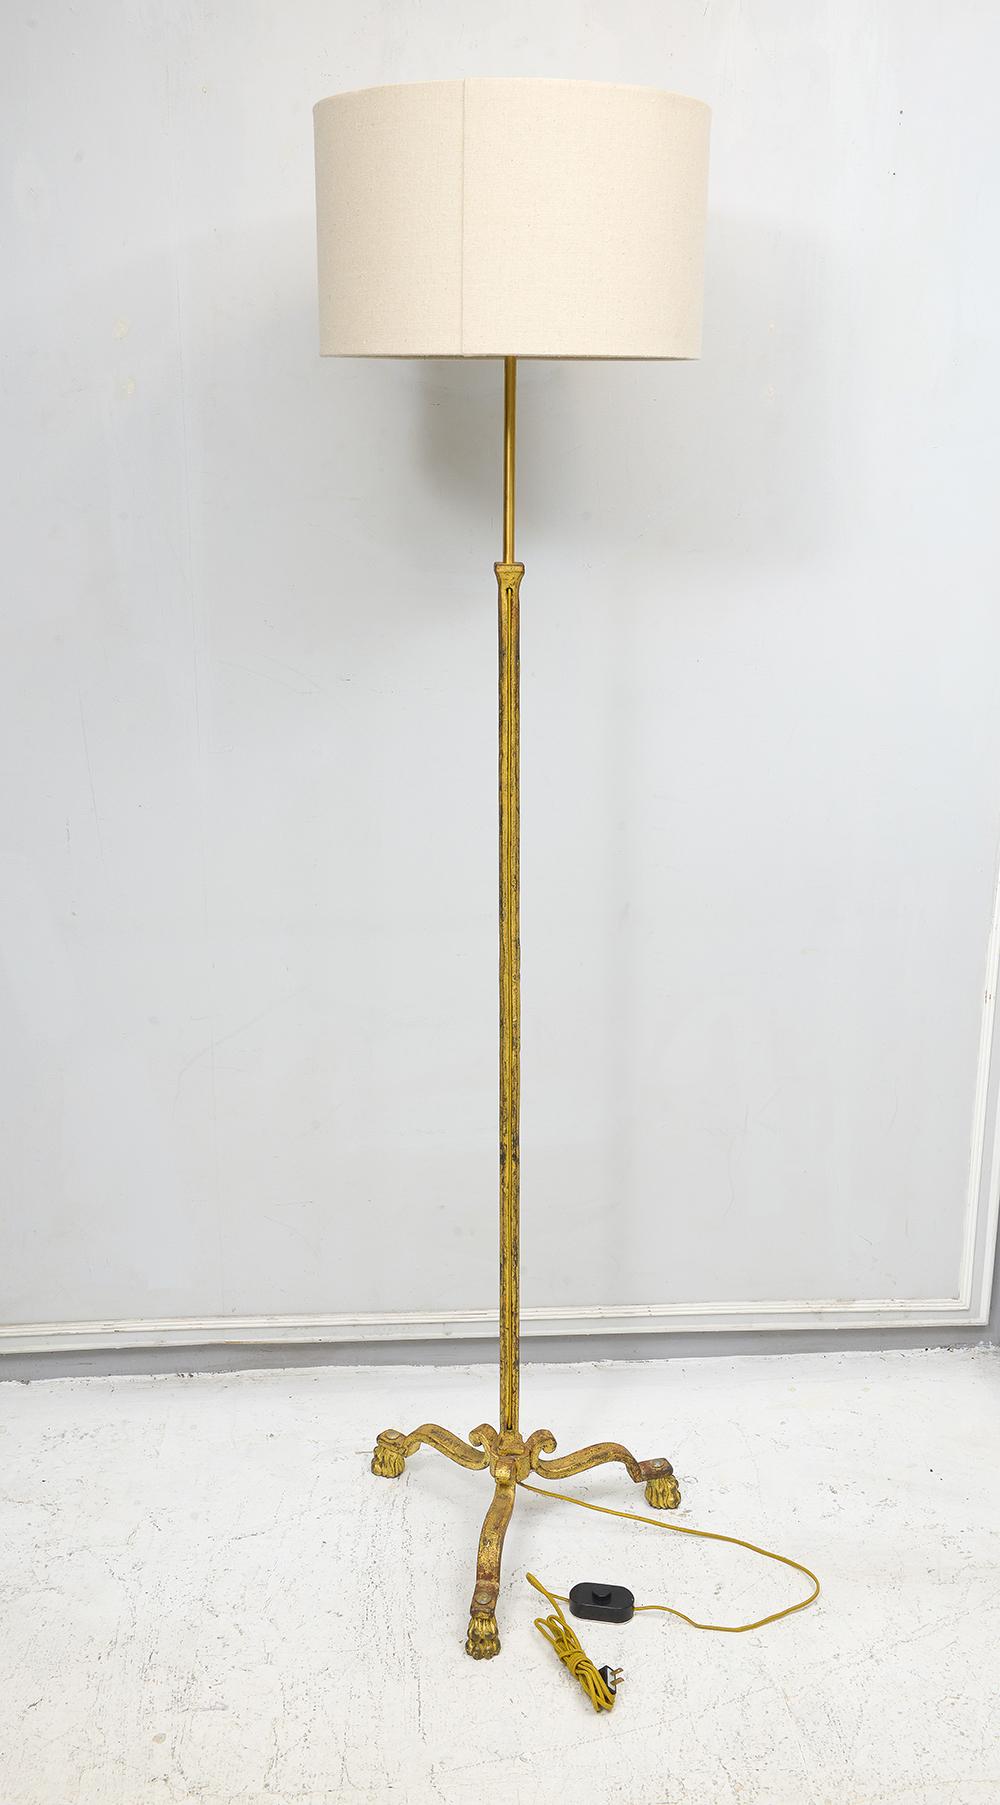 Gilt wrought iron floor lamp in the Ramsay Manner, shade included.